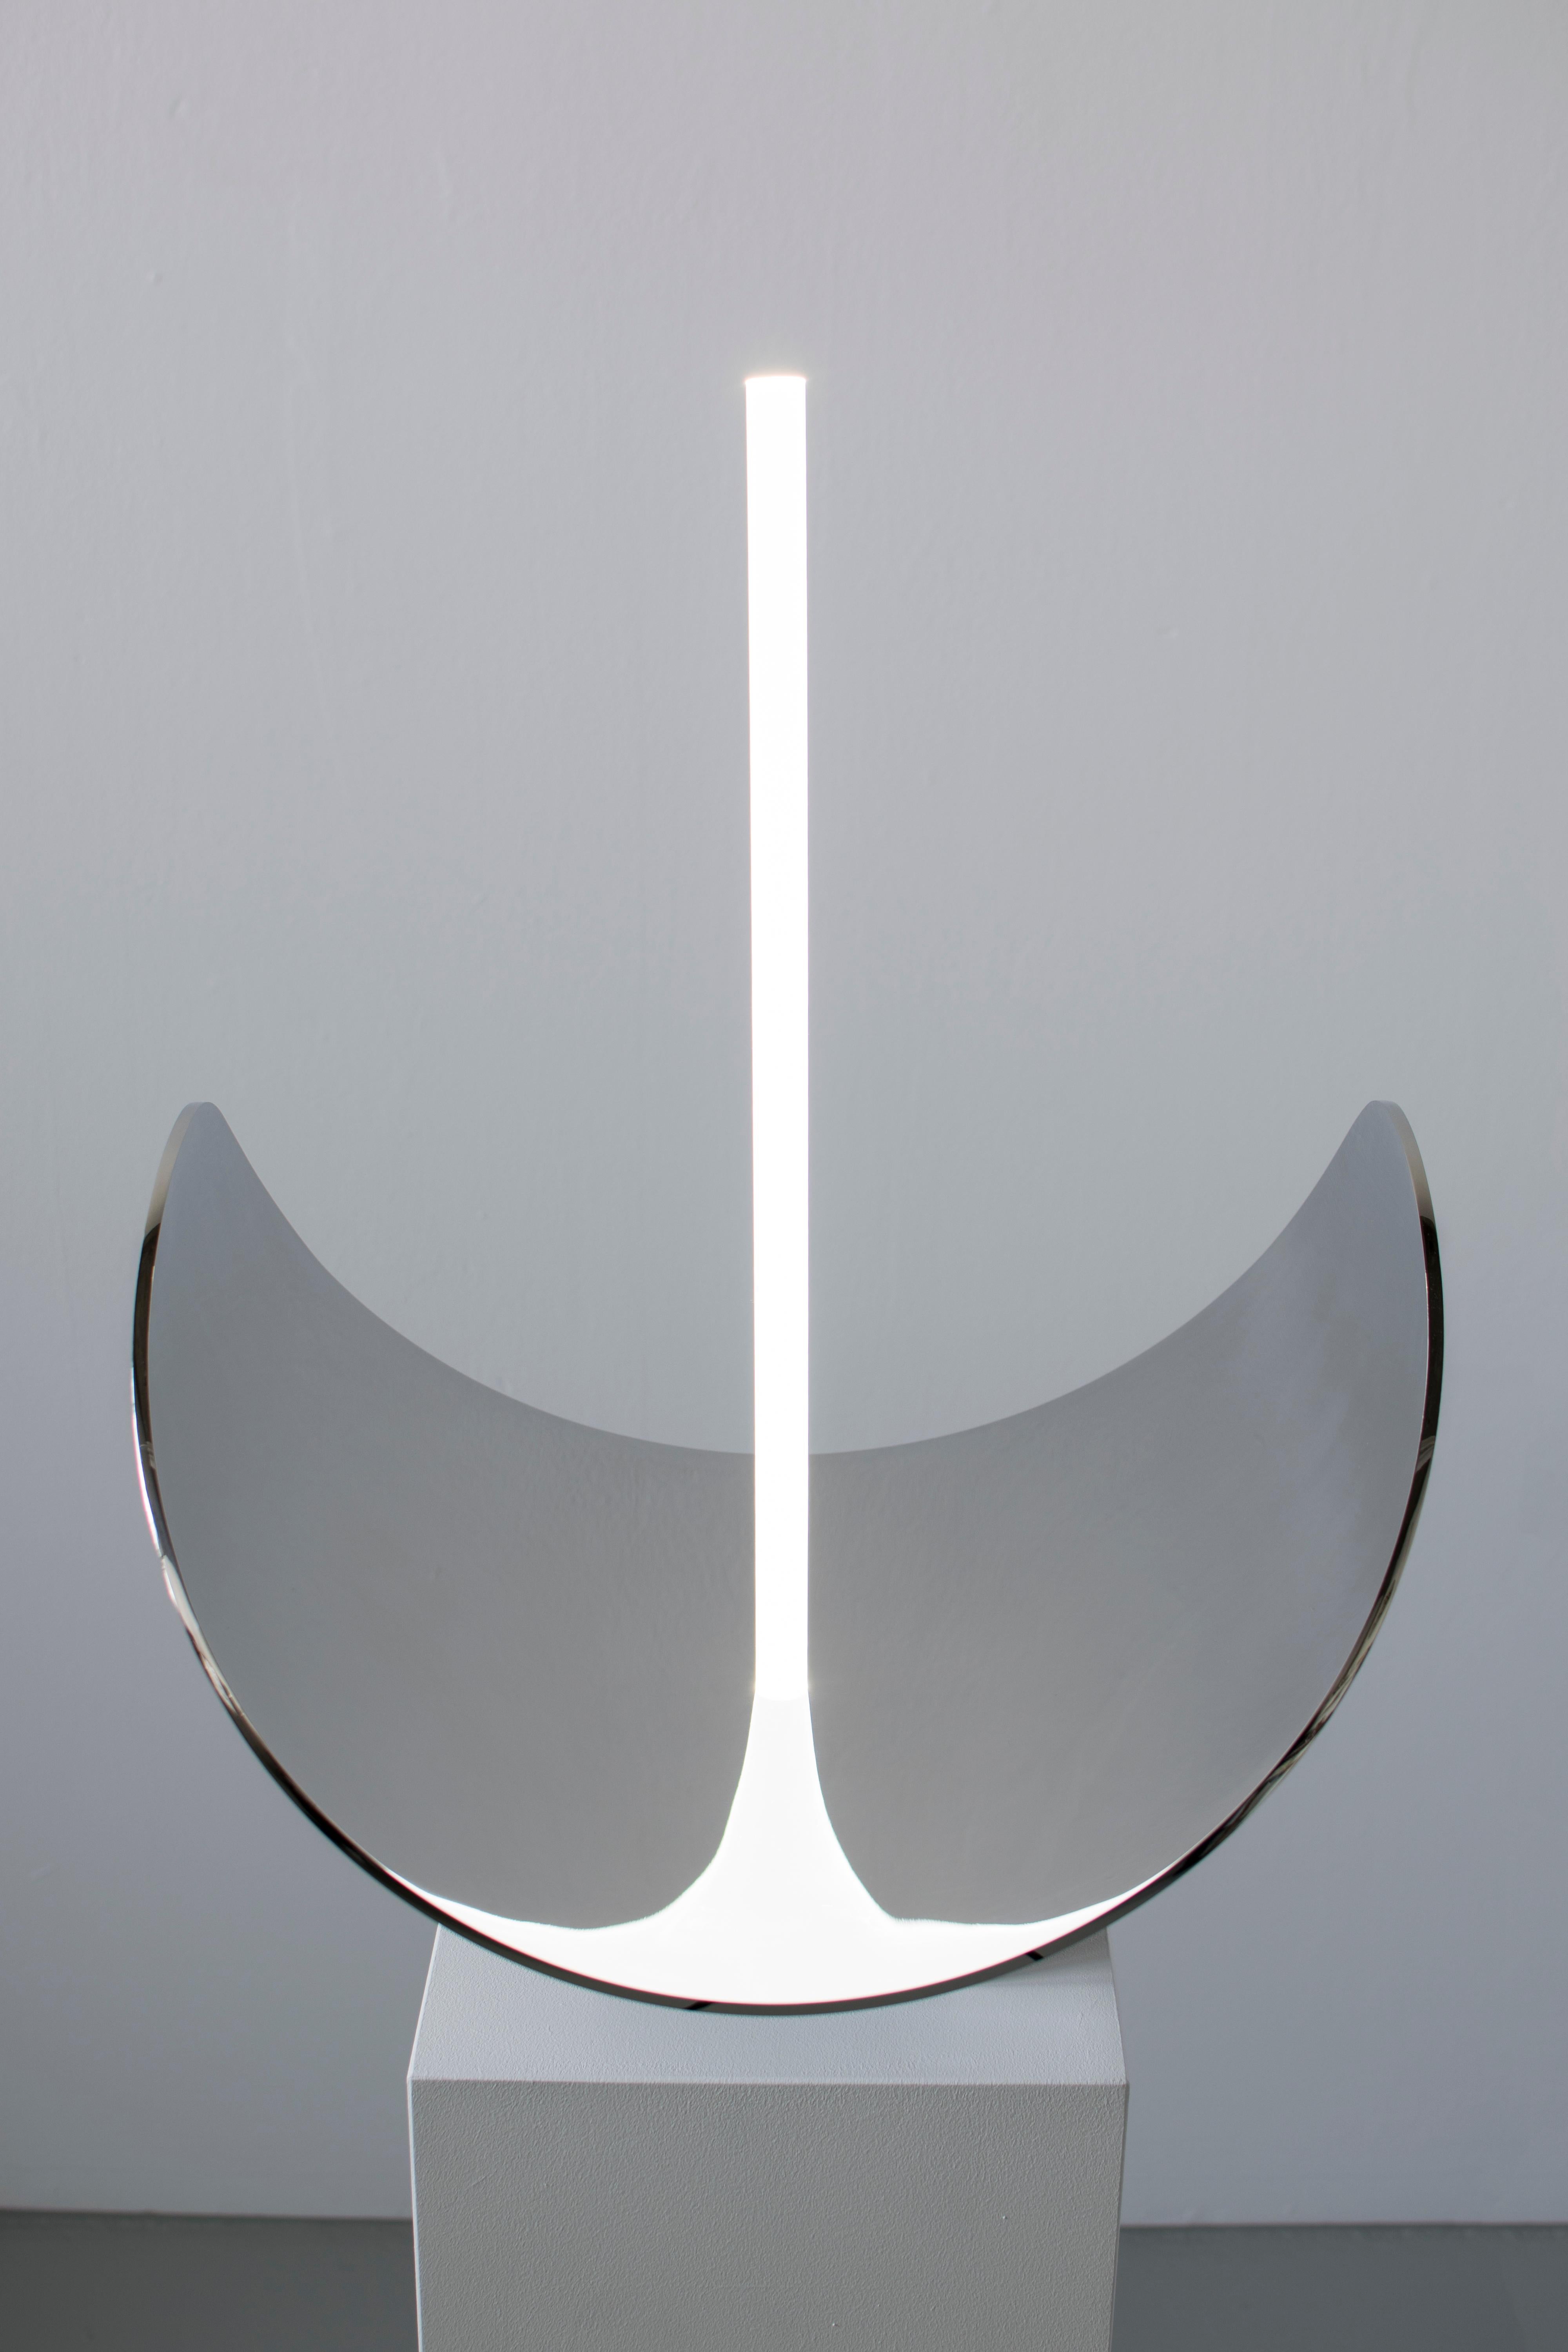 Sculptural enlightened Lamp - Maximilian Michaelis

Title: The elusive nature of perception, No. 09

Measures: ca. 50 x 60 x 50 cm

Material: Polished stainless steel, Belgian bluestone, arcylic glas, Led

The basis and inspiration for